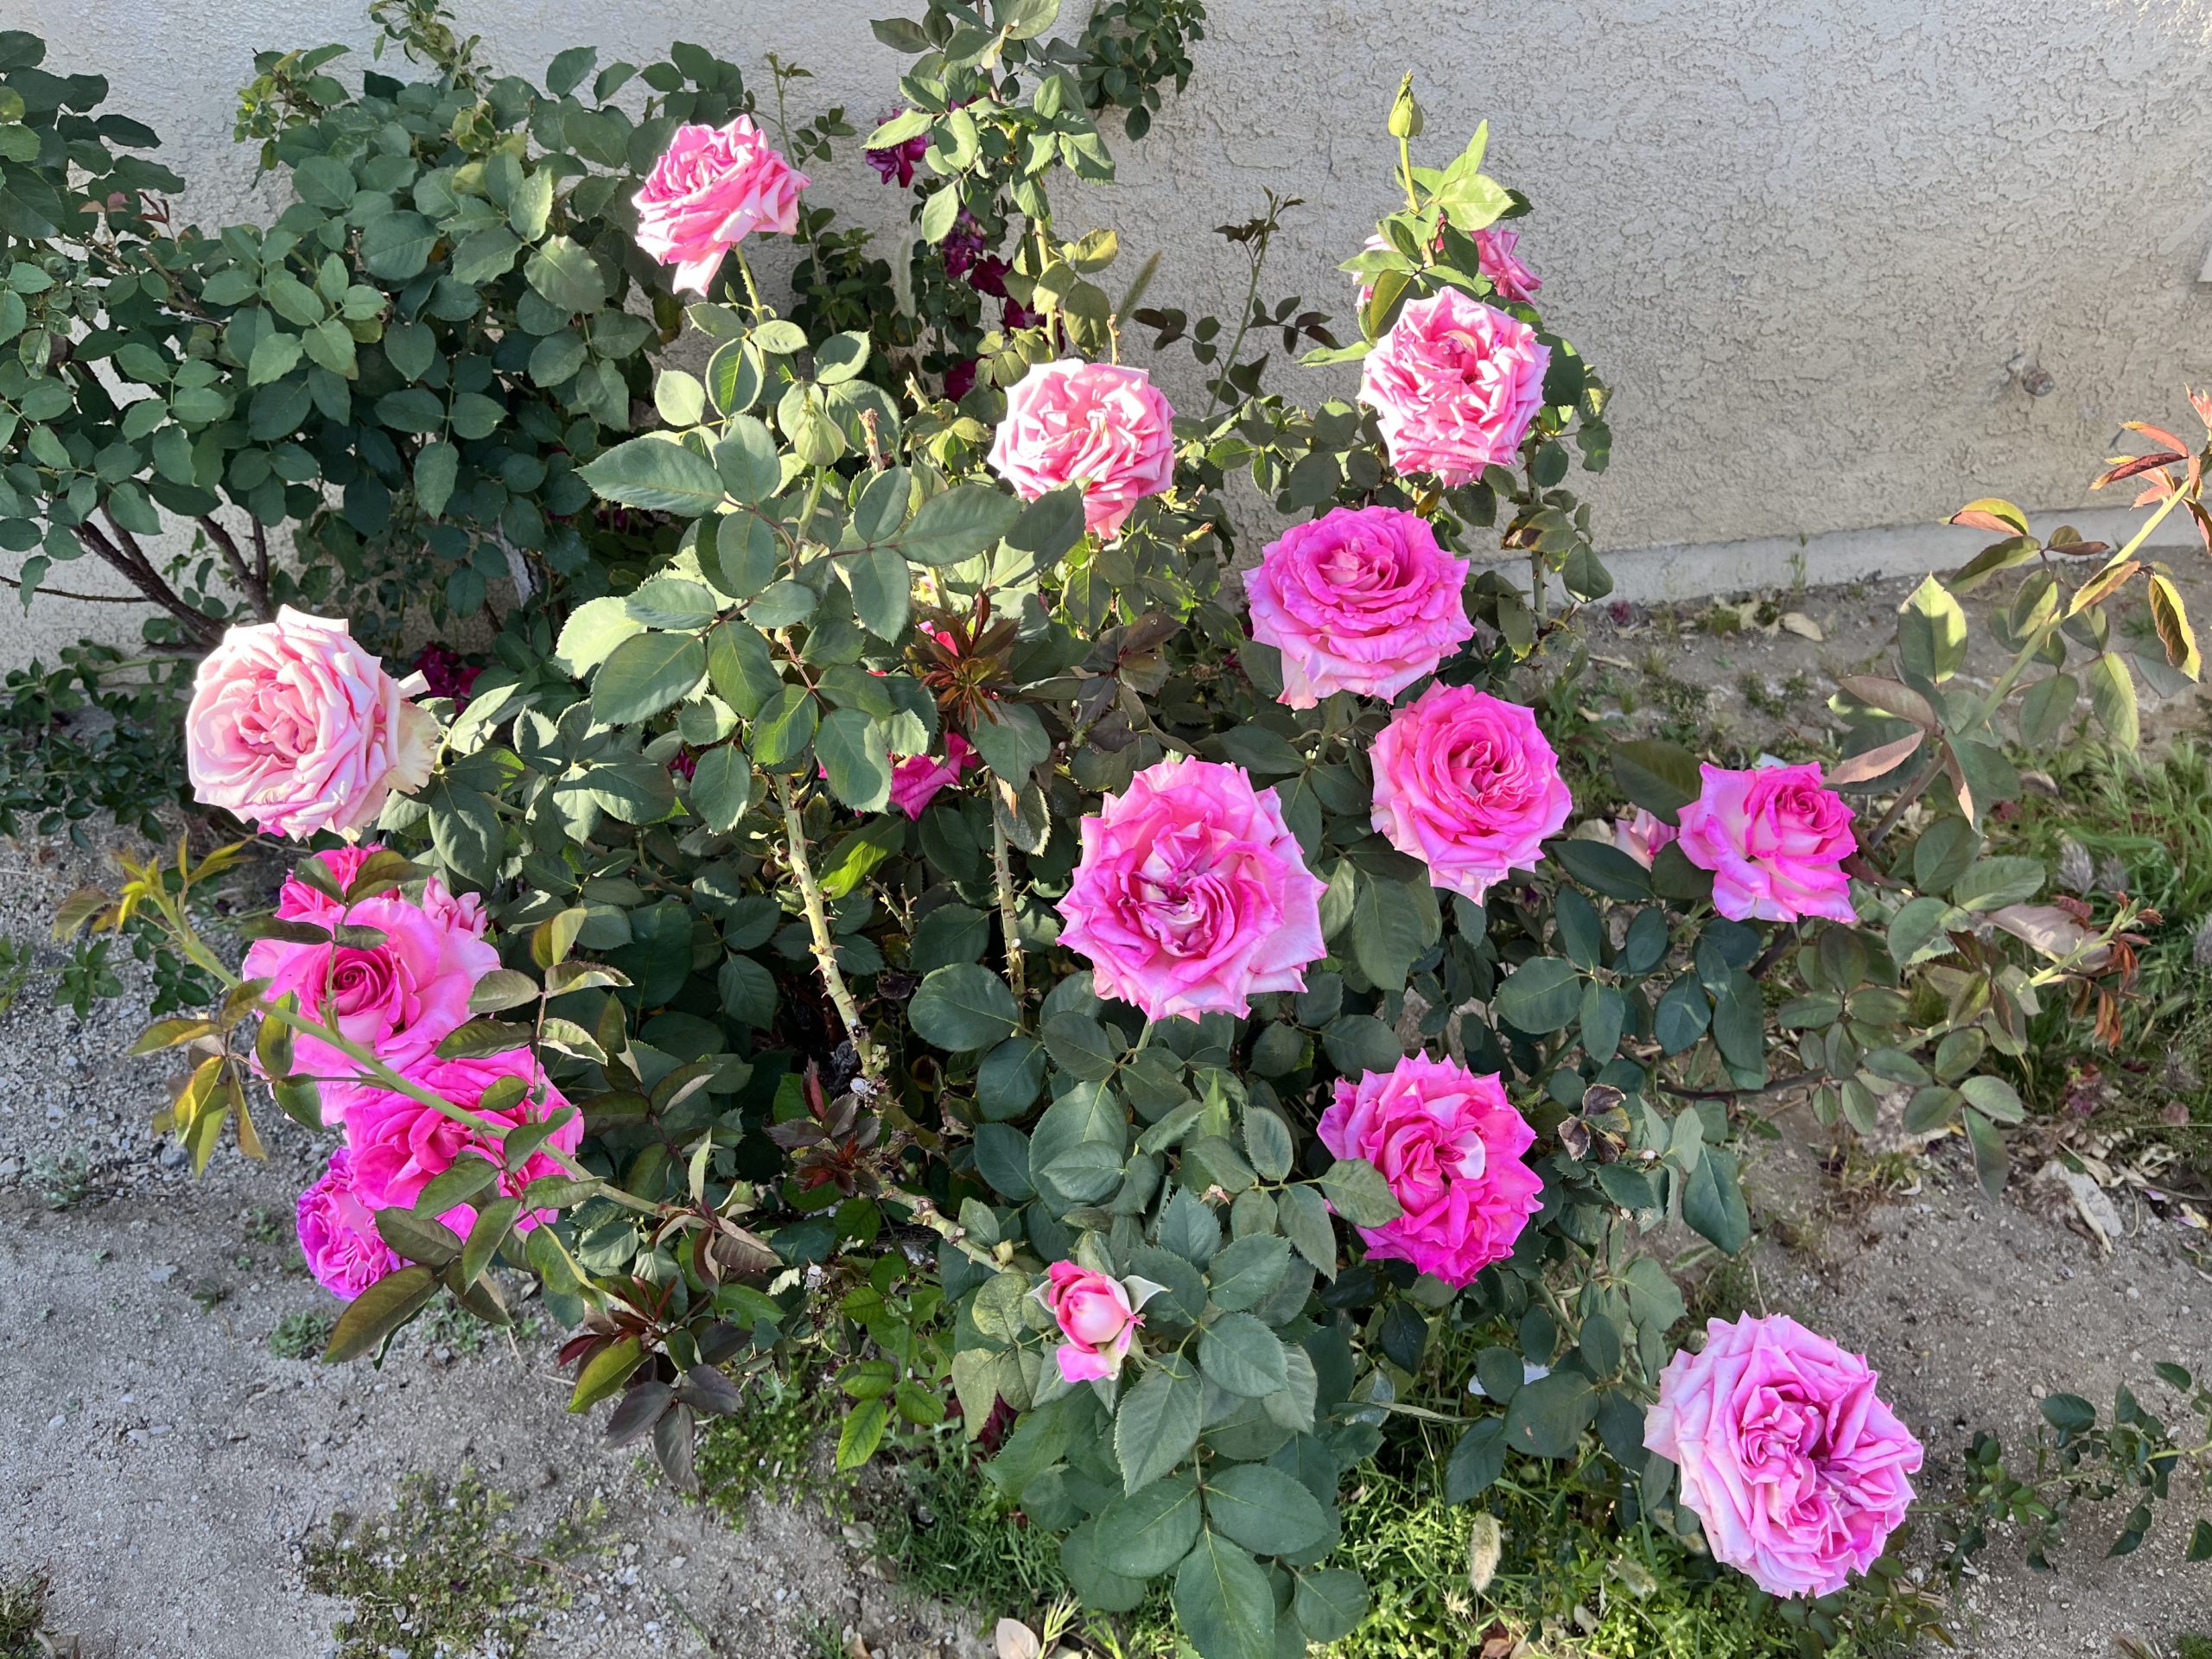 Pink roses in the sun.